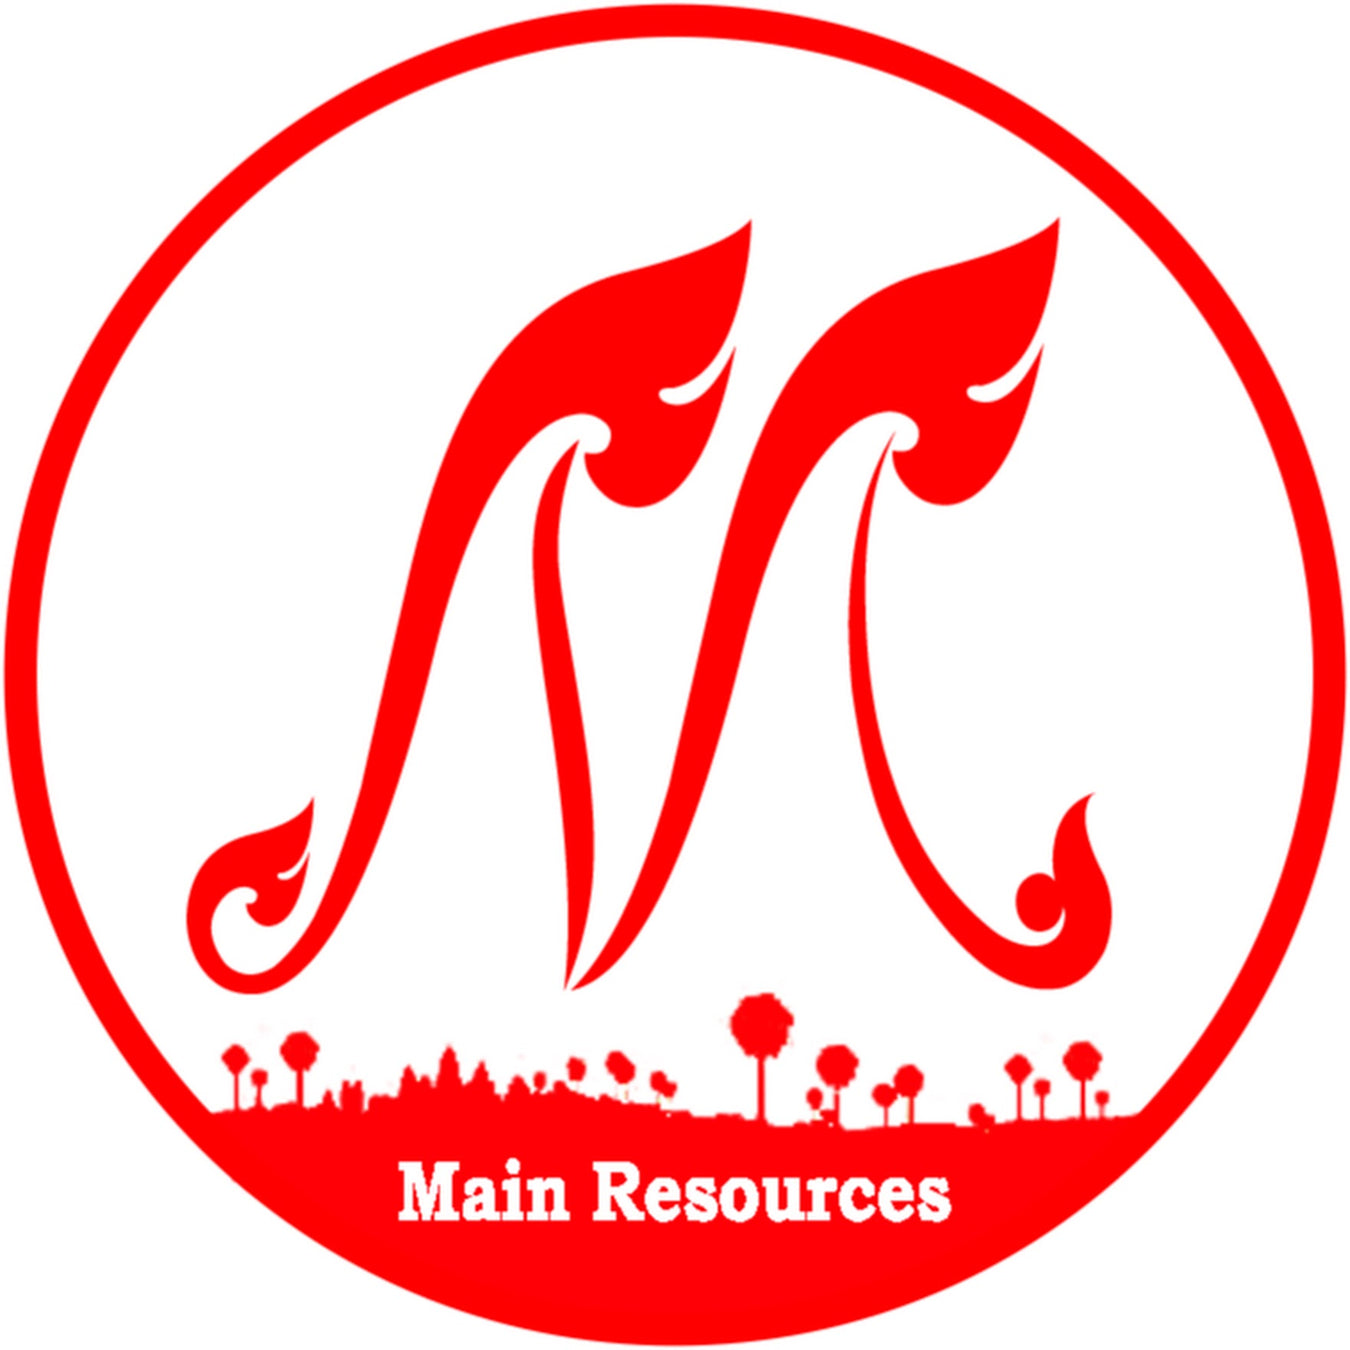 Main Resources